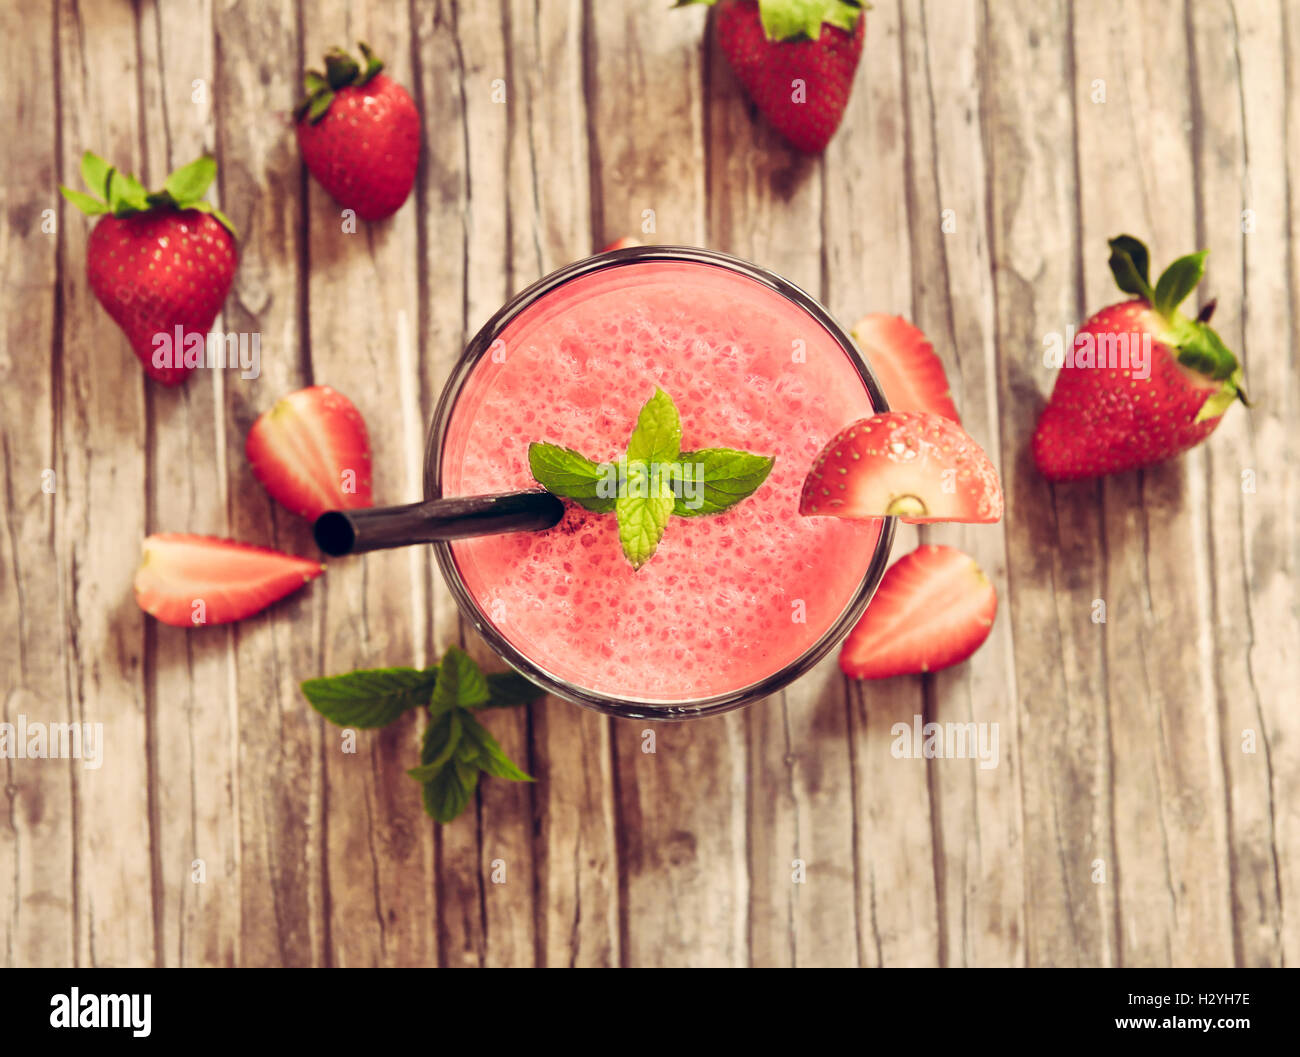 strawberry smoothie in glass on wooden rustic table Stock Photo